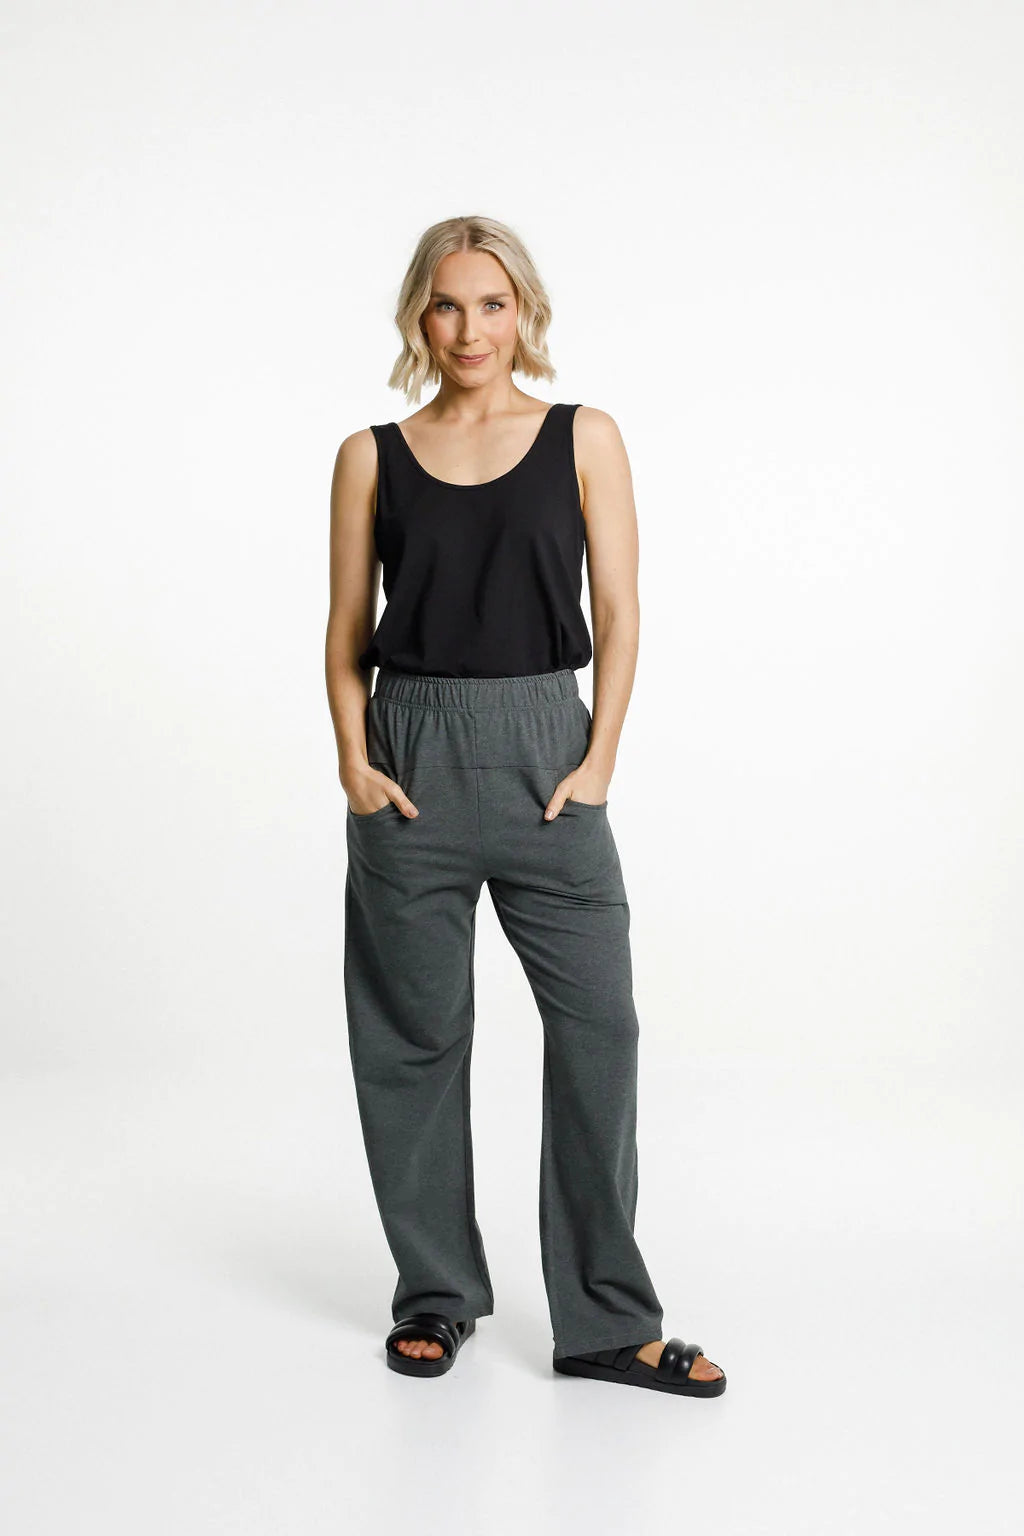 Home Lee Avenue Pants -WINTER - Charcoal with Matte Black X